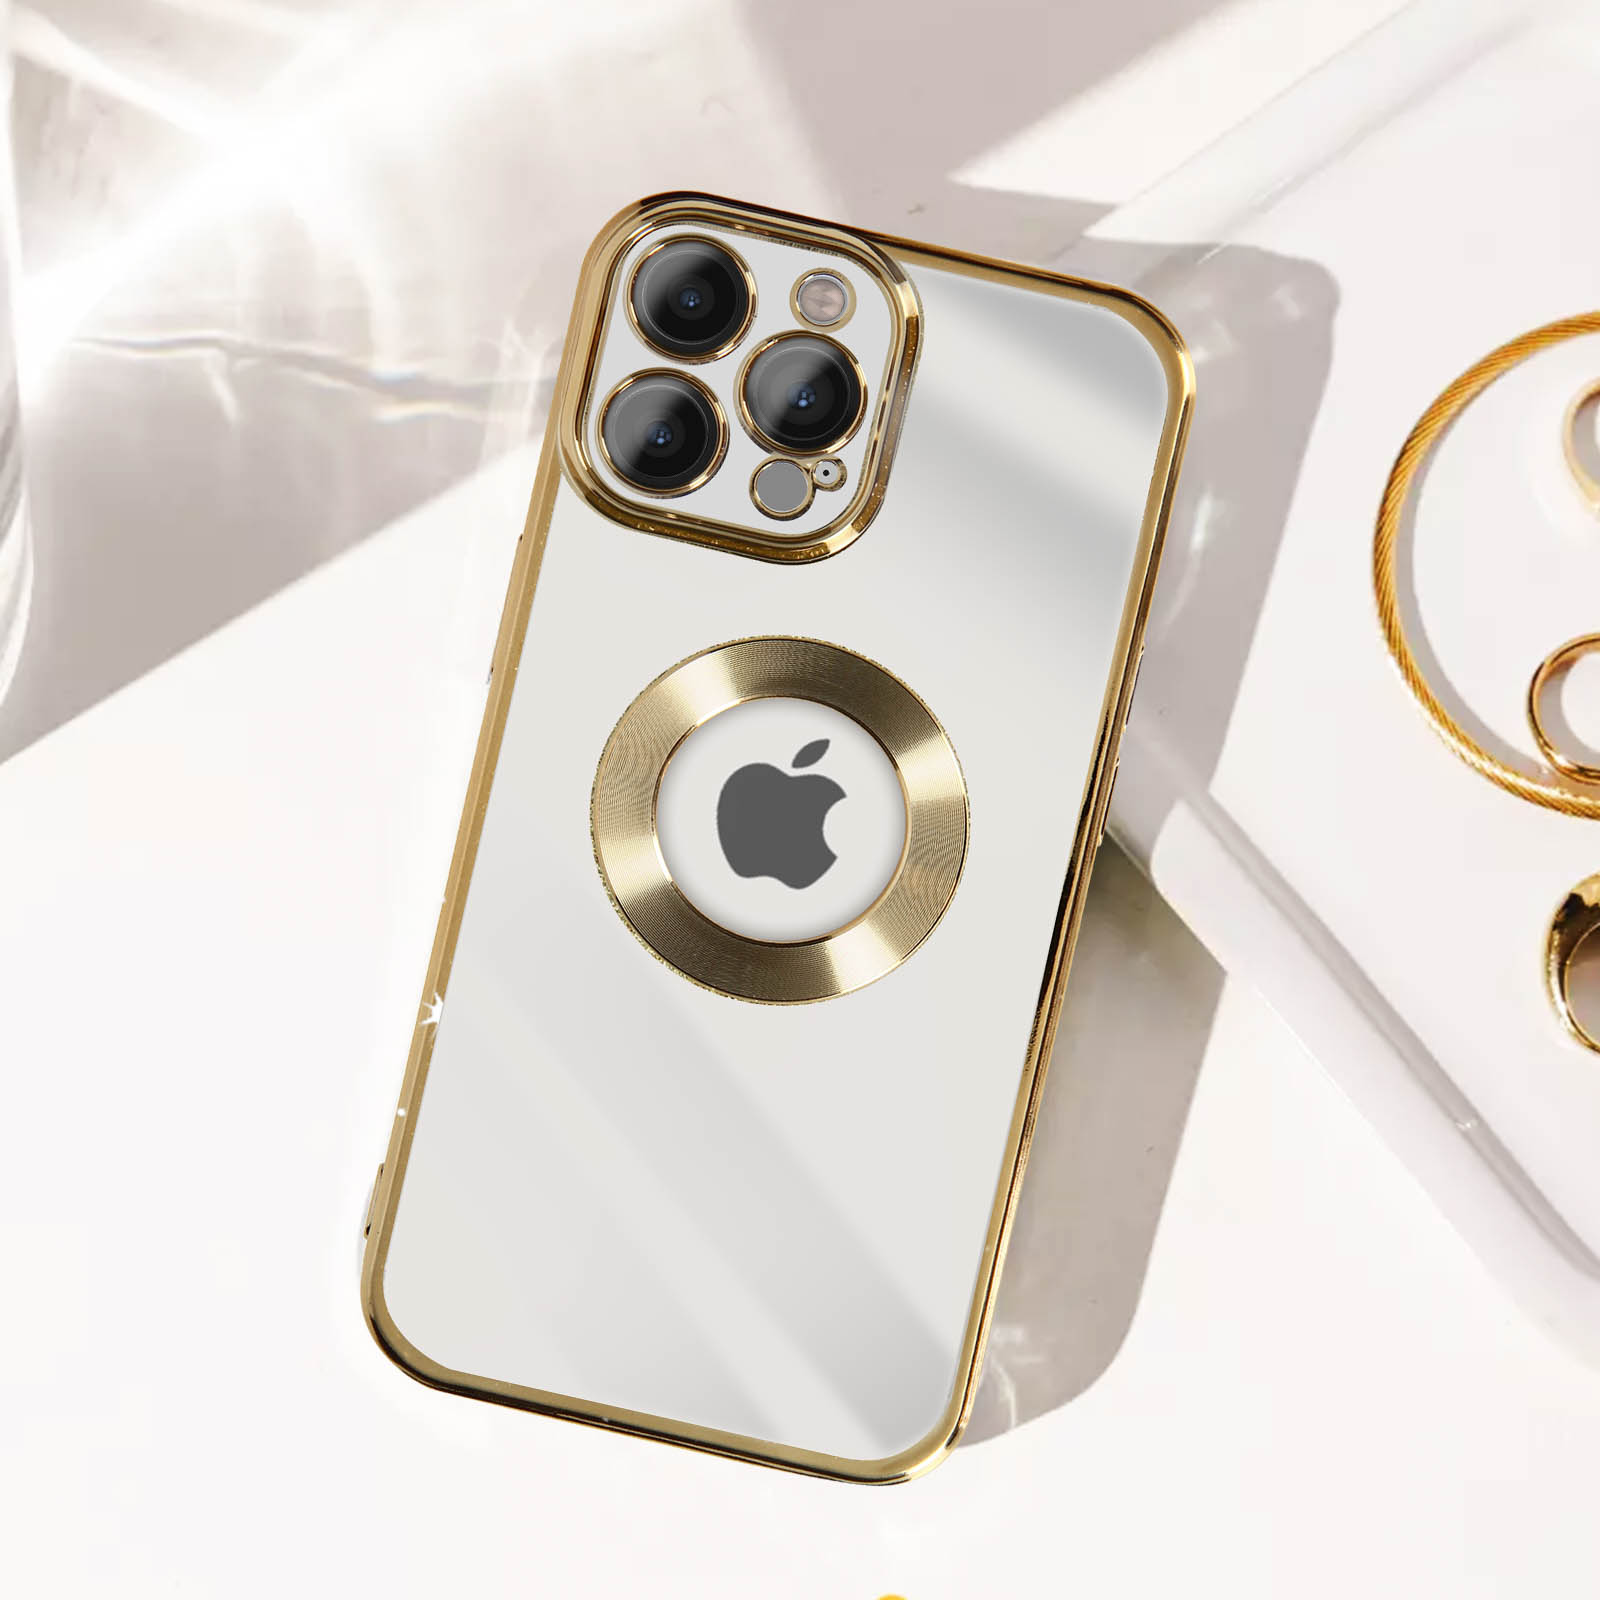 Series, iPhone Spark Gold Backcover, 12 Protecam Apple, AVIZAR Pro,